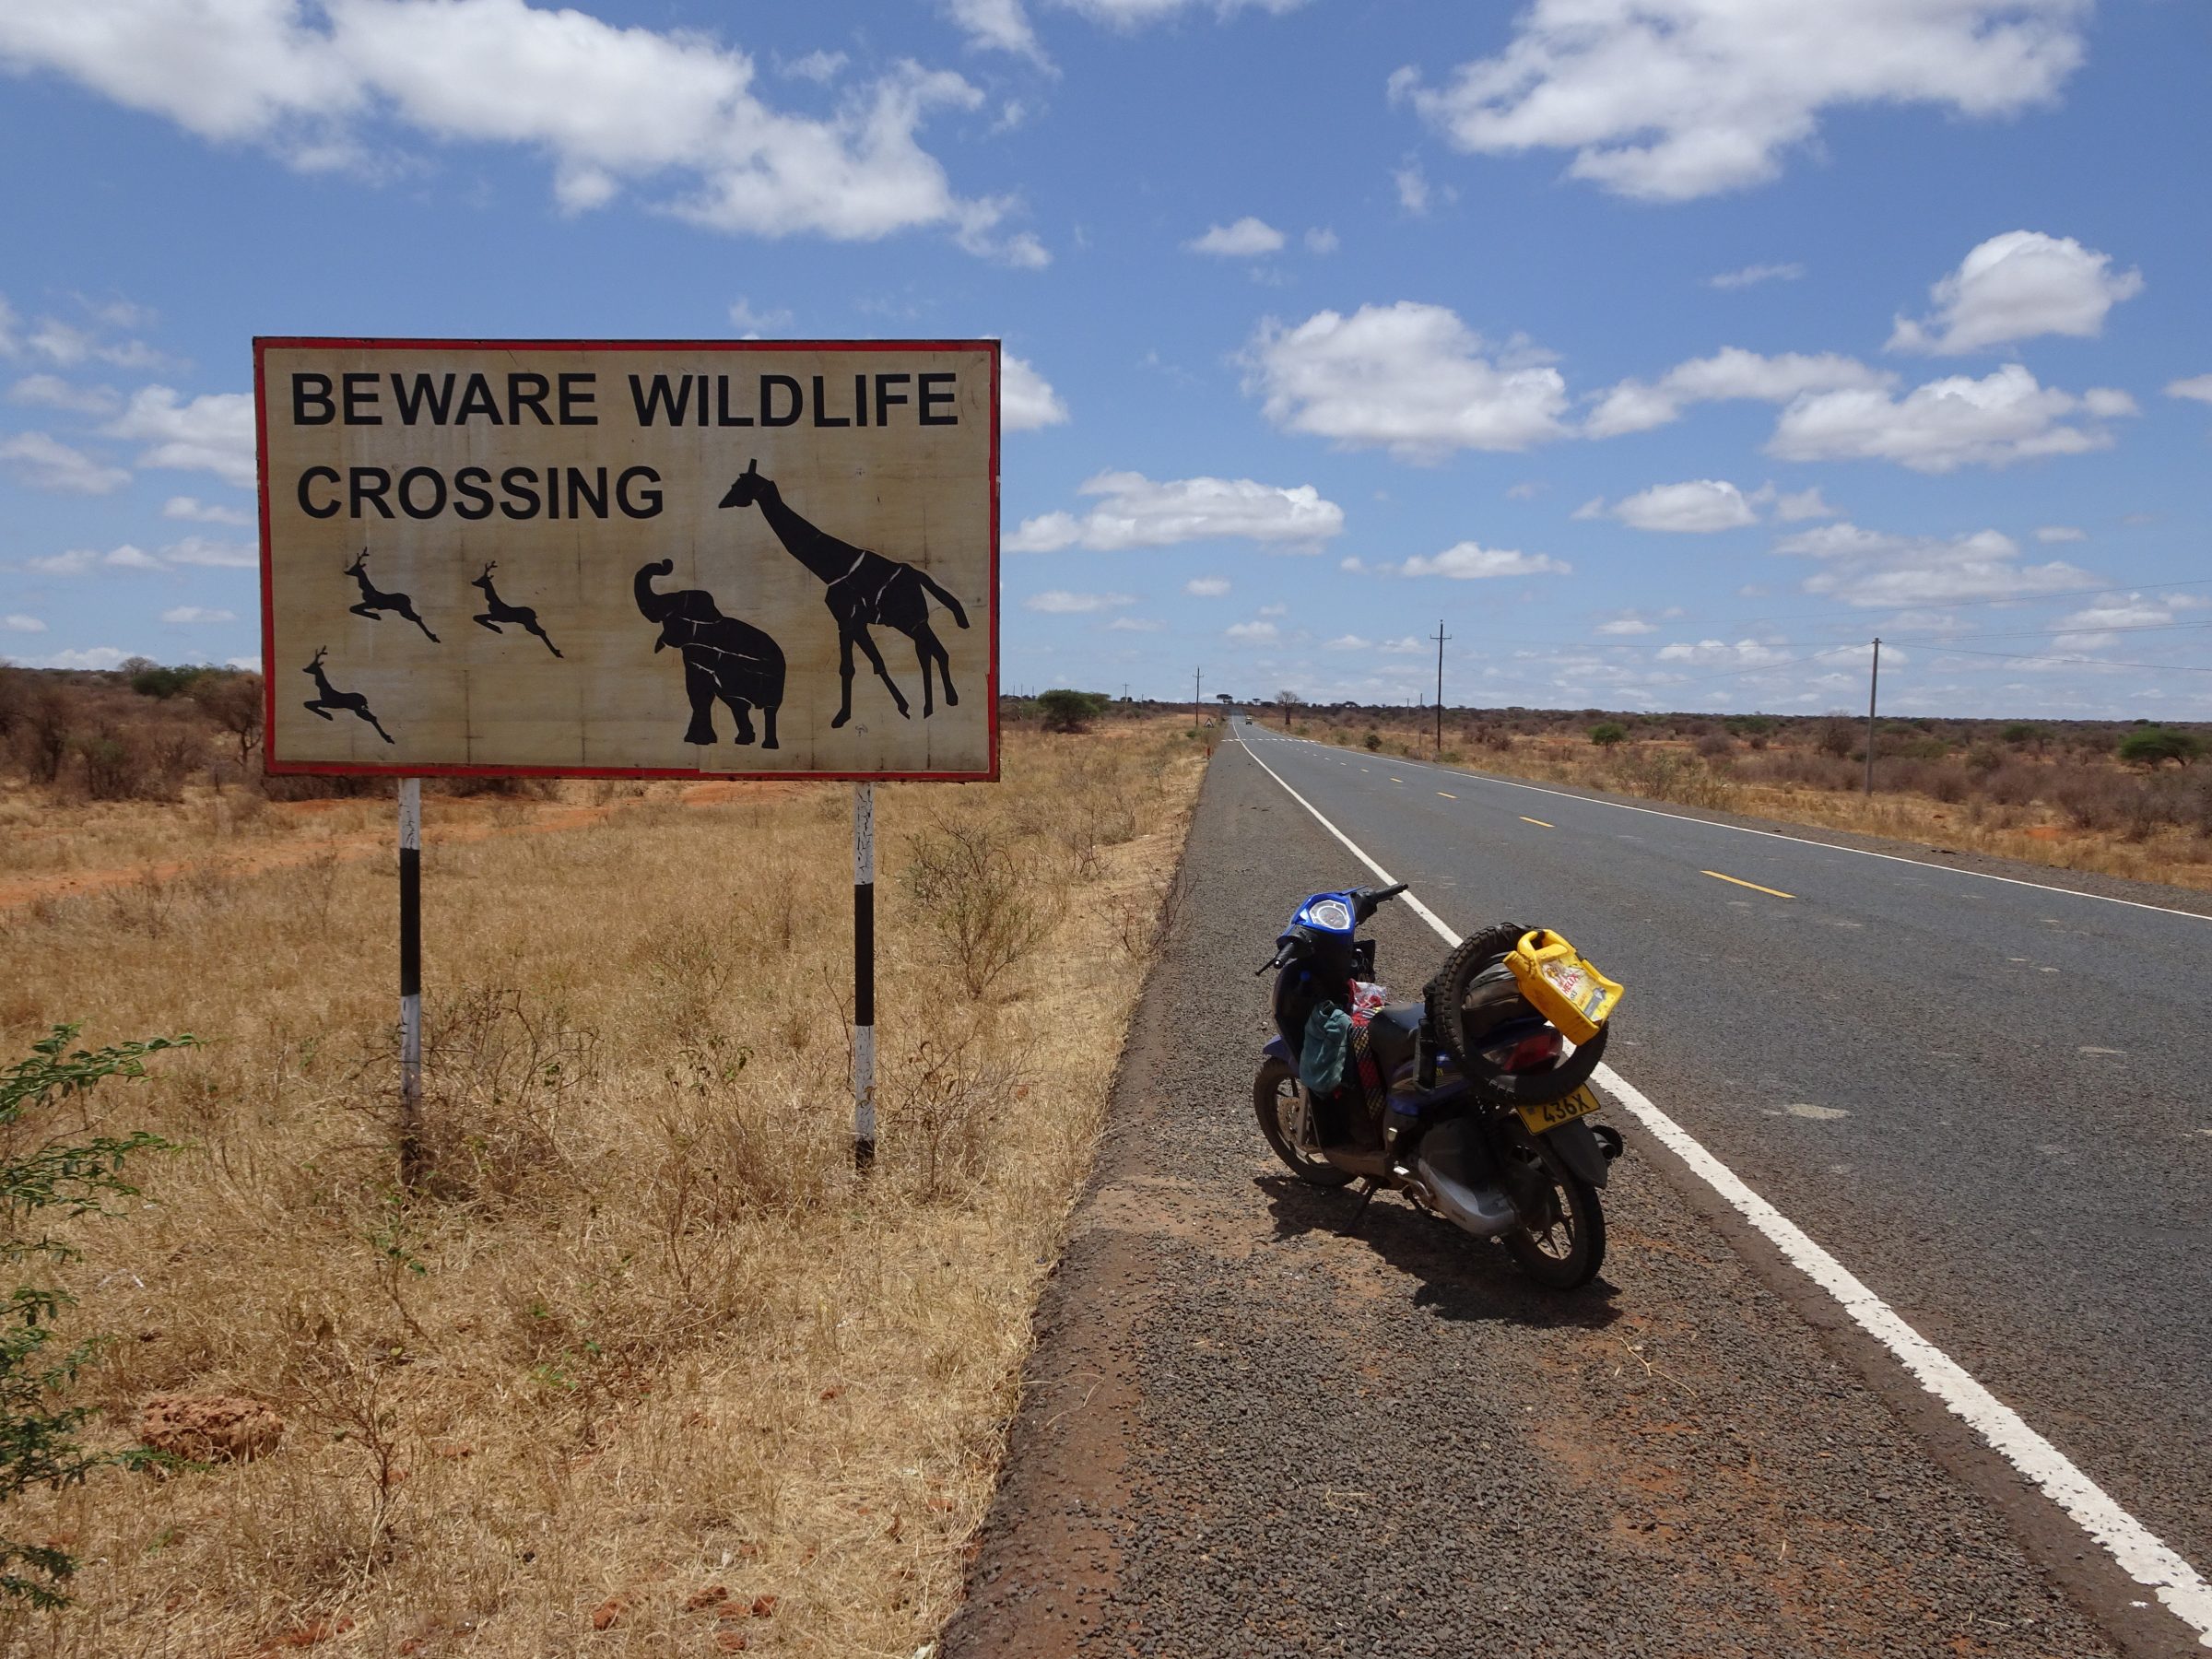 Game crossing warning sign on the A6 in Tsavo West NP